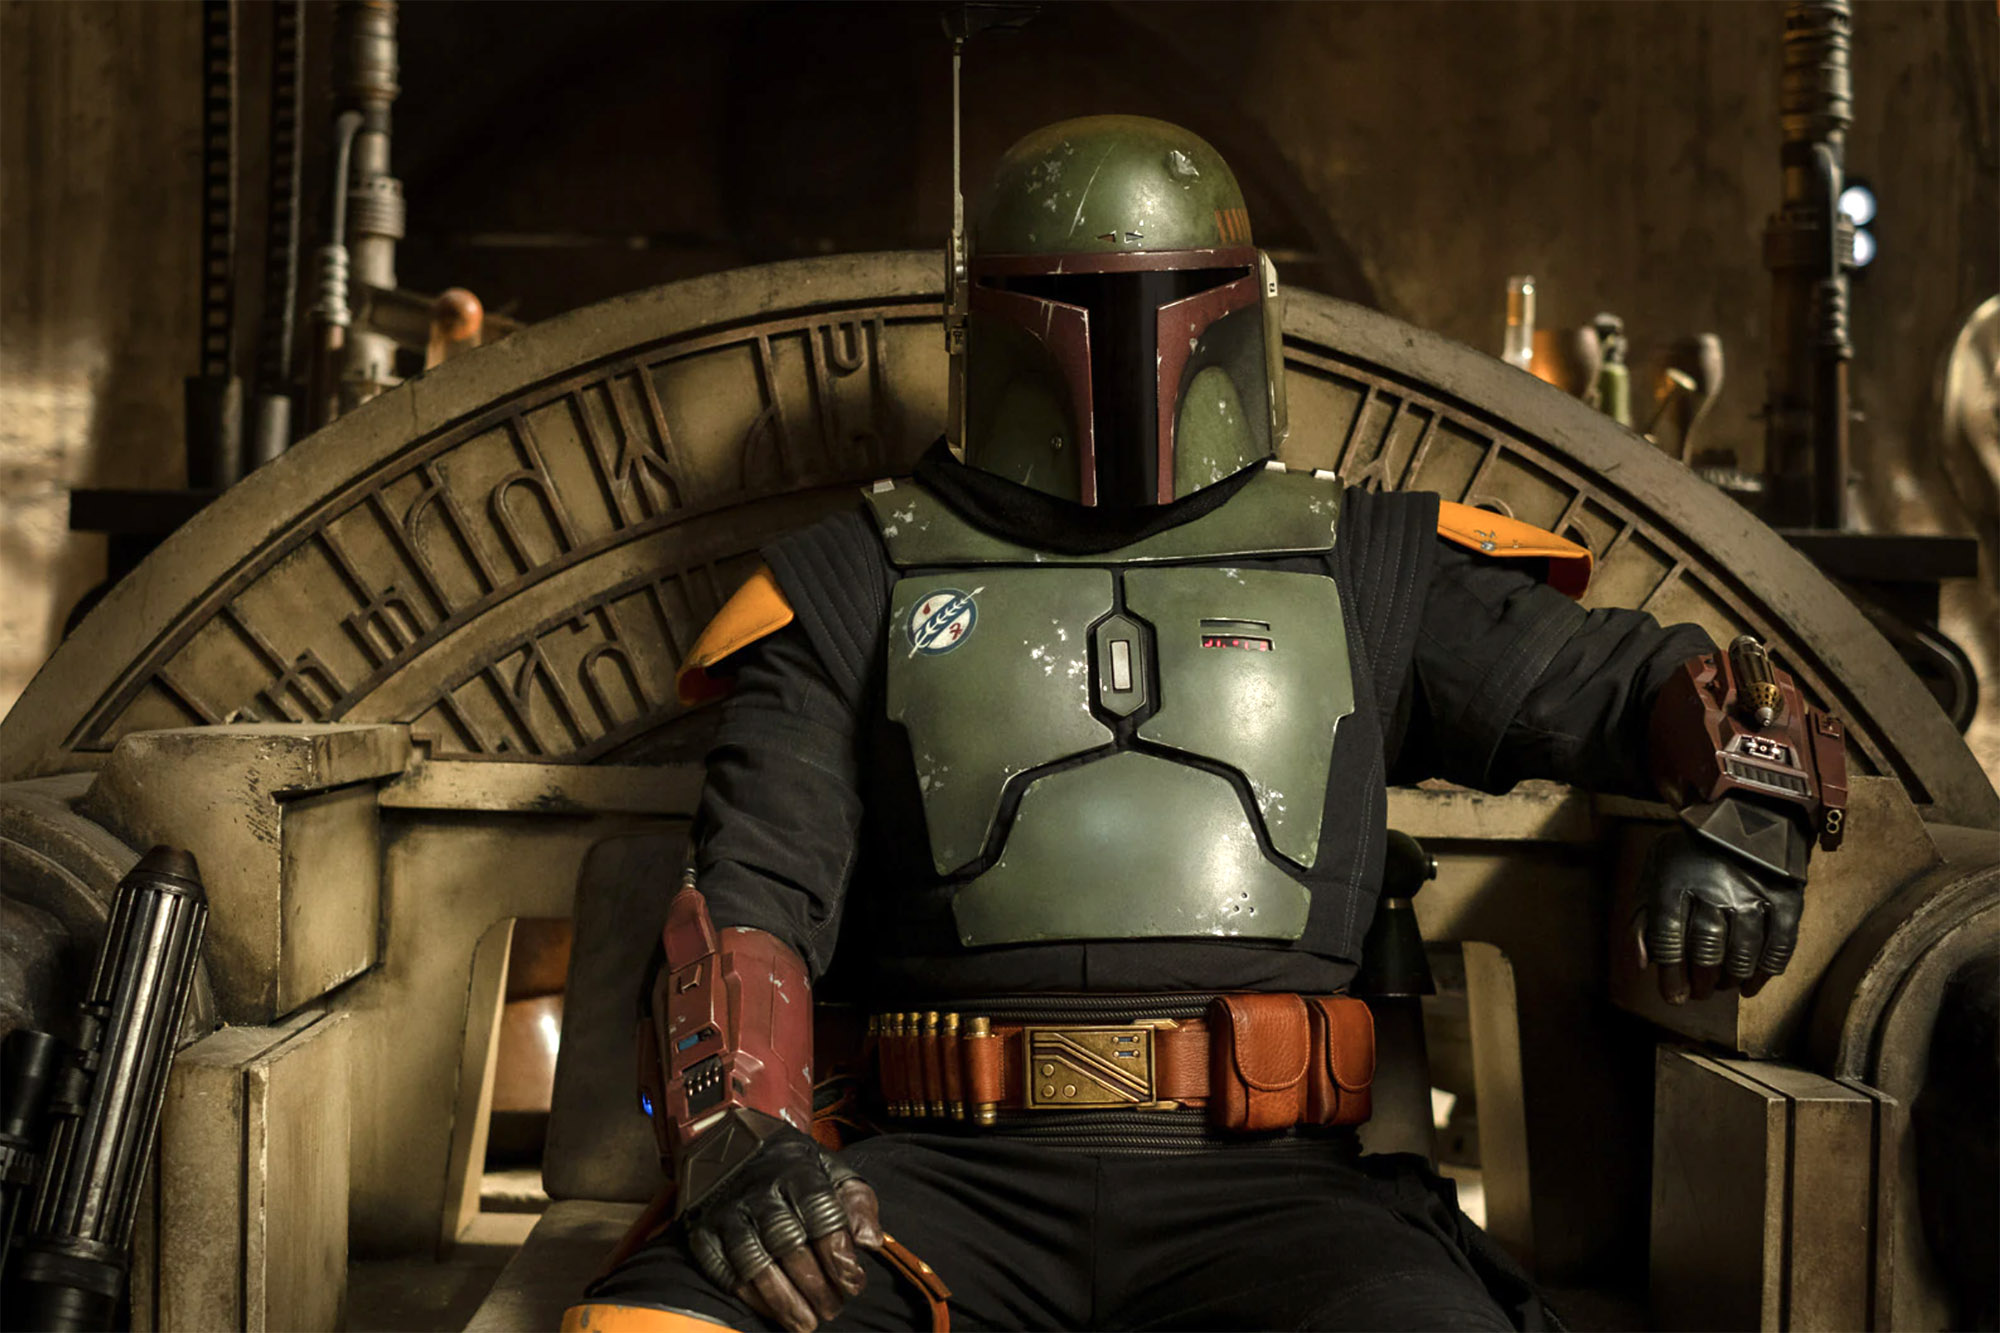 Microsoft is giving away Mandalorian-inspired Xbox Series X/S and